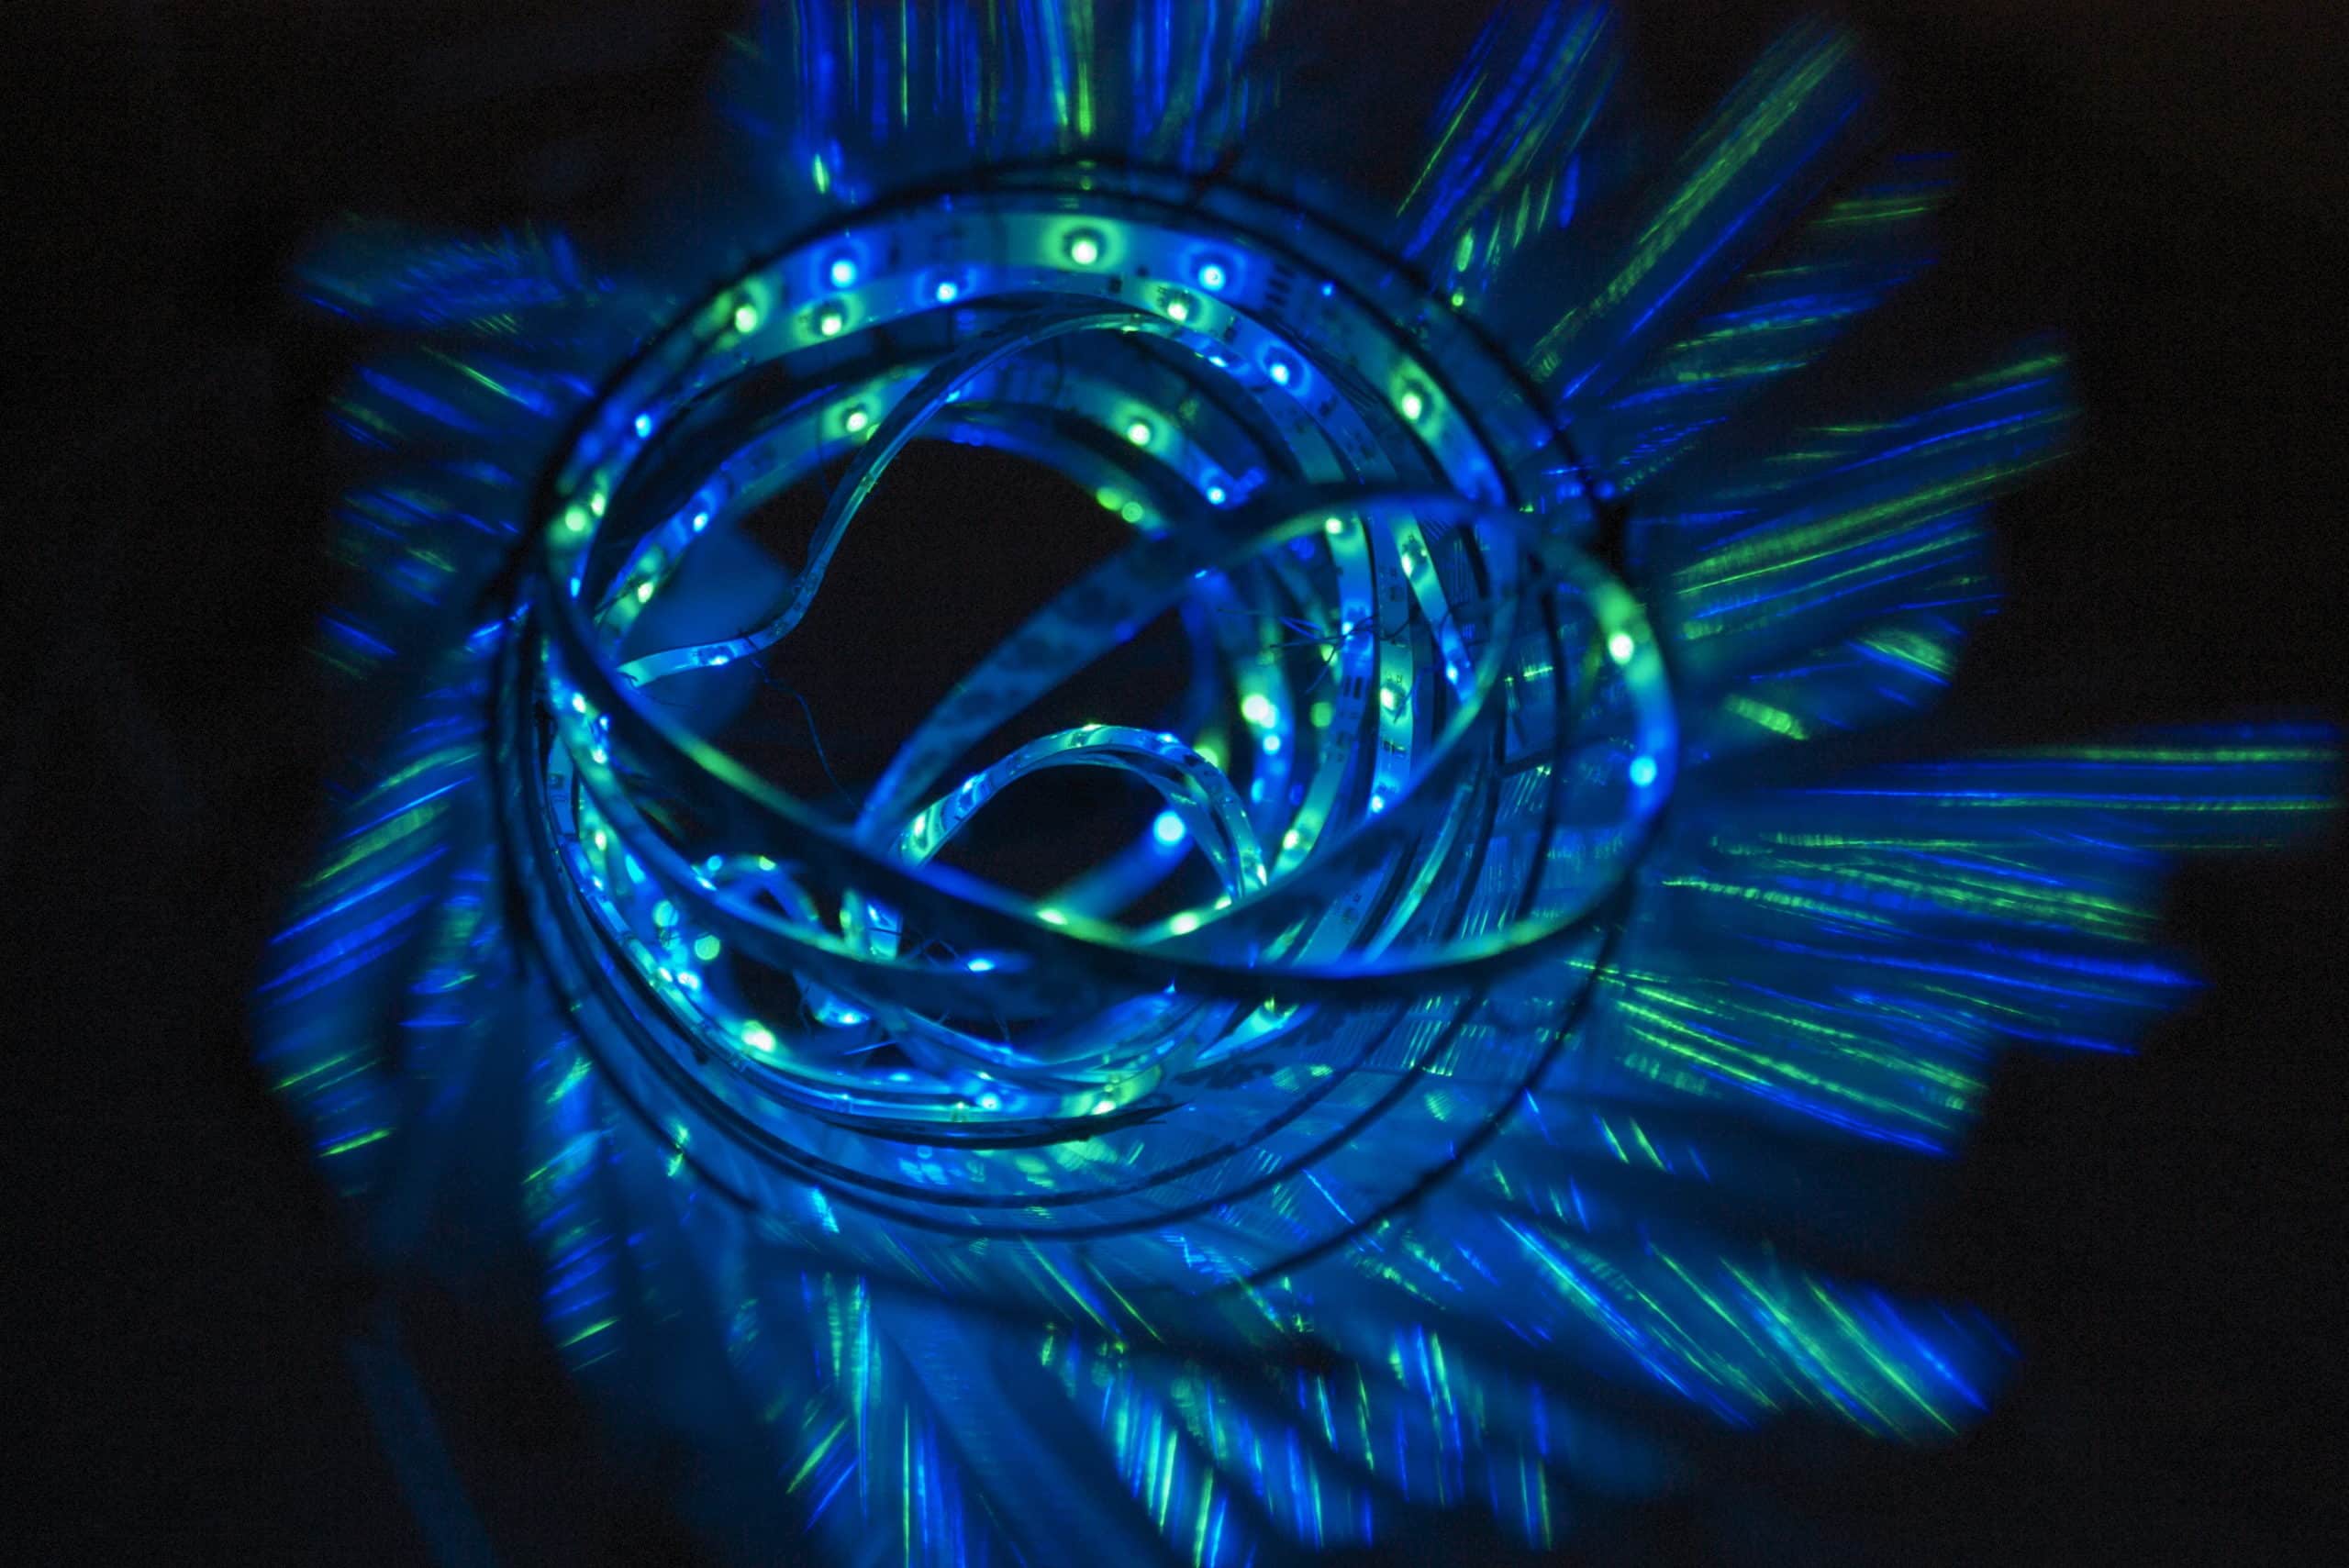 Blue pendant cylinder LED light sculpture seen from below, 4 feet long, pale blue lights shine through a veil of polycarbonate strips mounted on a wire frame, an explosion of form and colour.